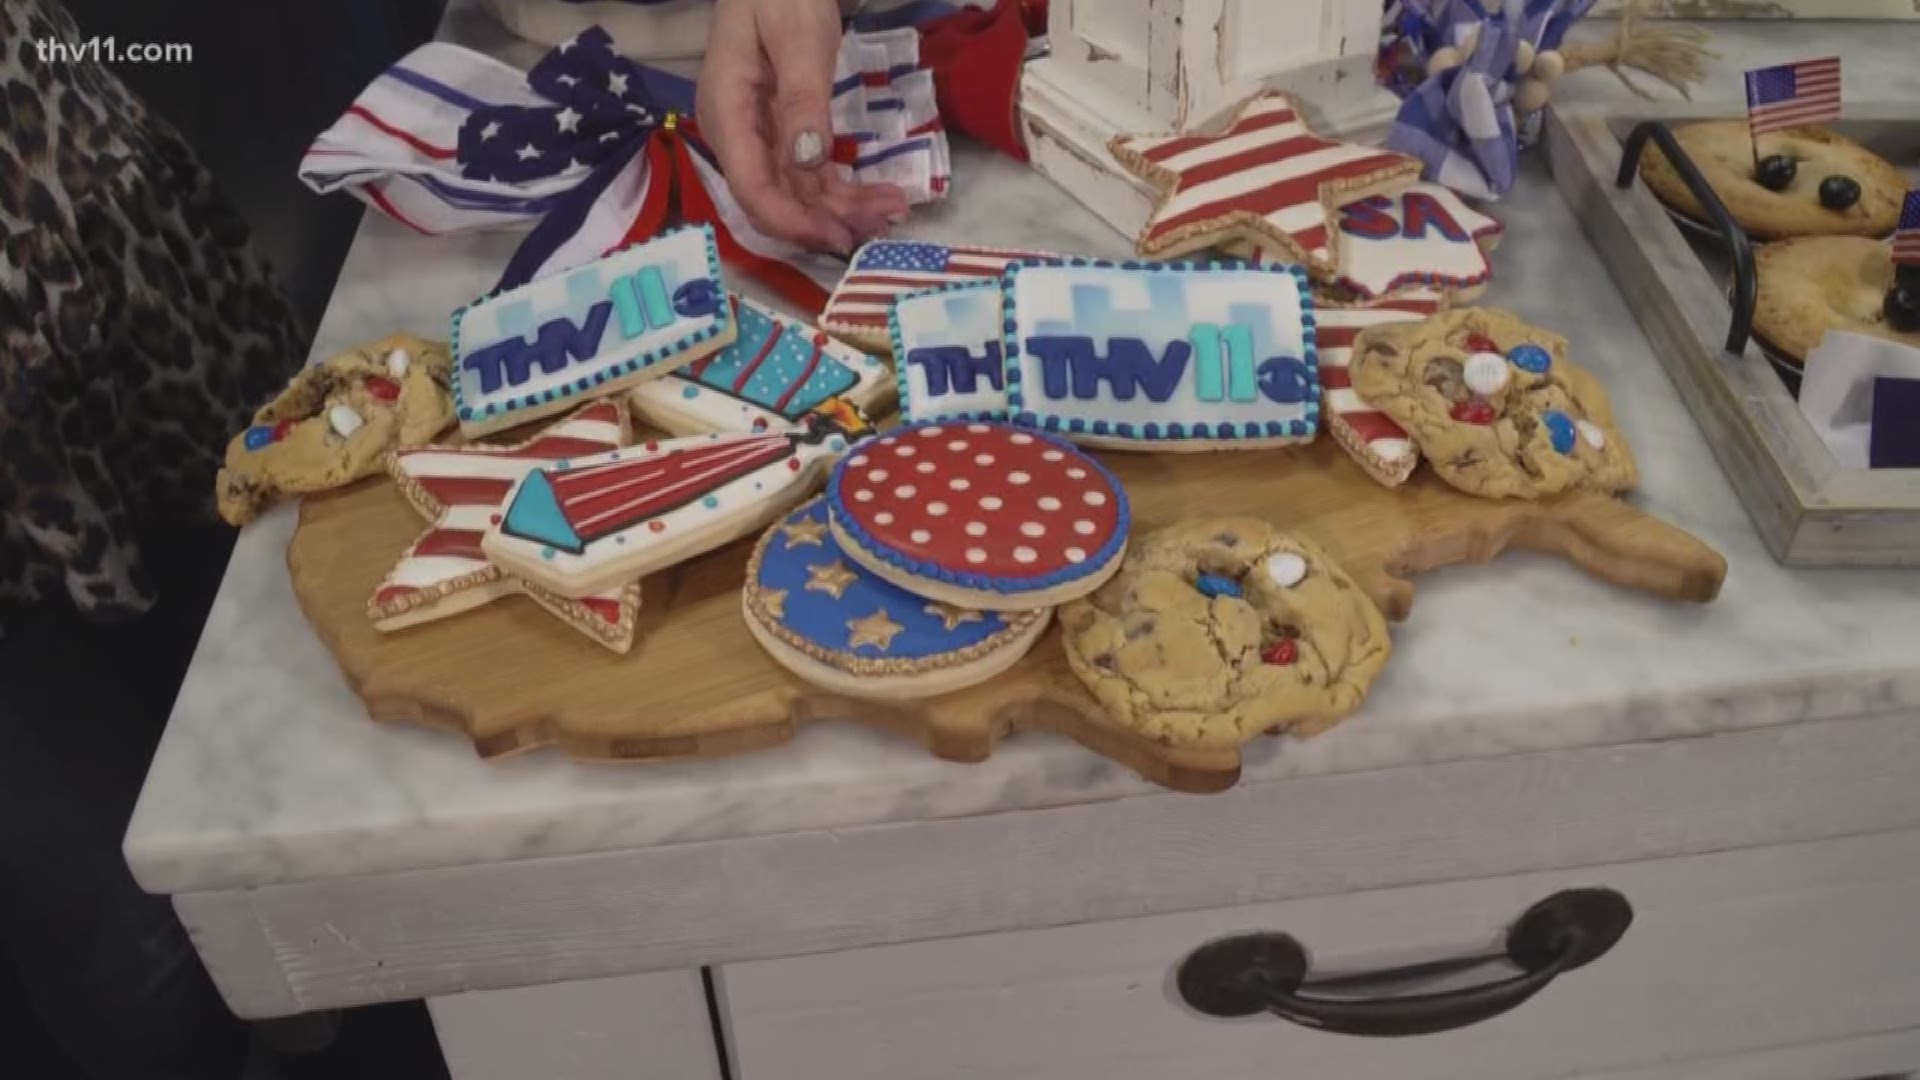 Lifestyle and Food Blogger Pat Downs shared fun and festive dessert ideas for the Fourth of July.